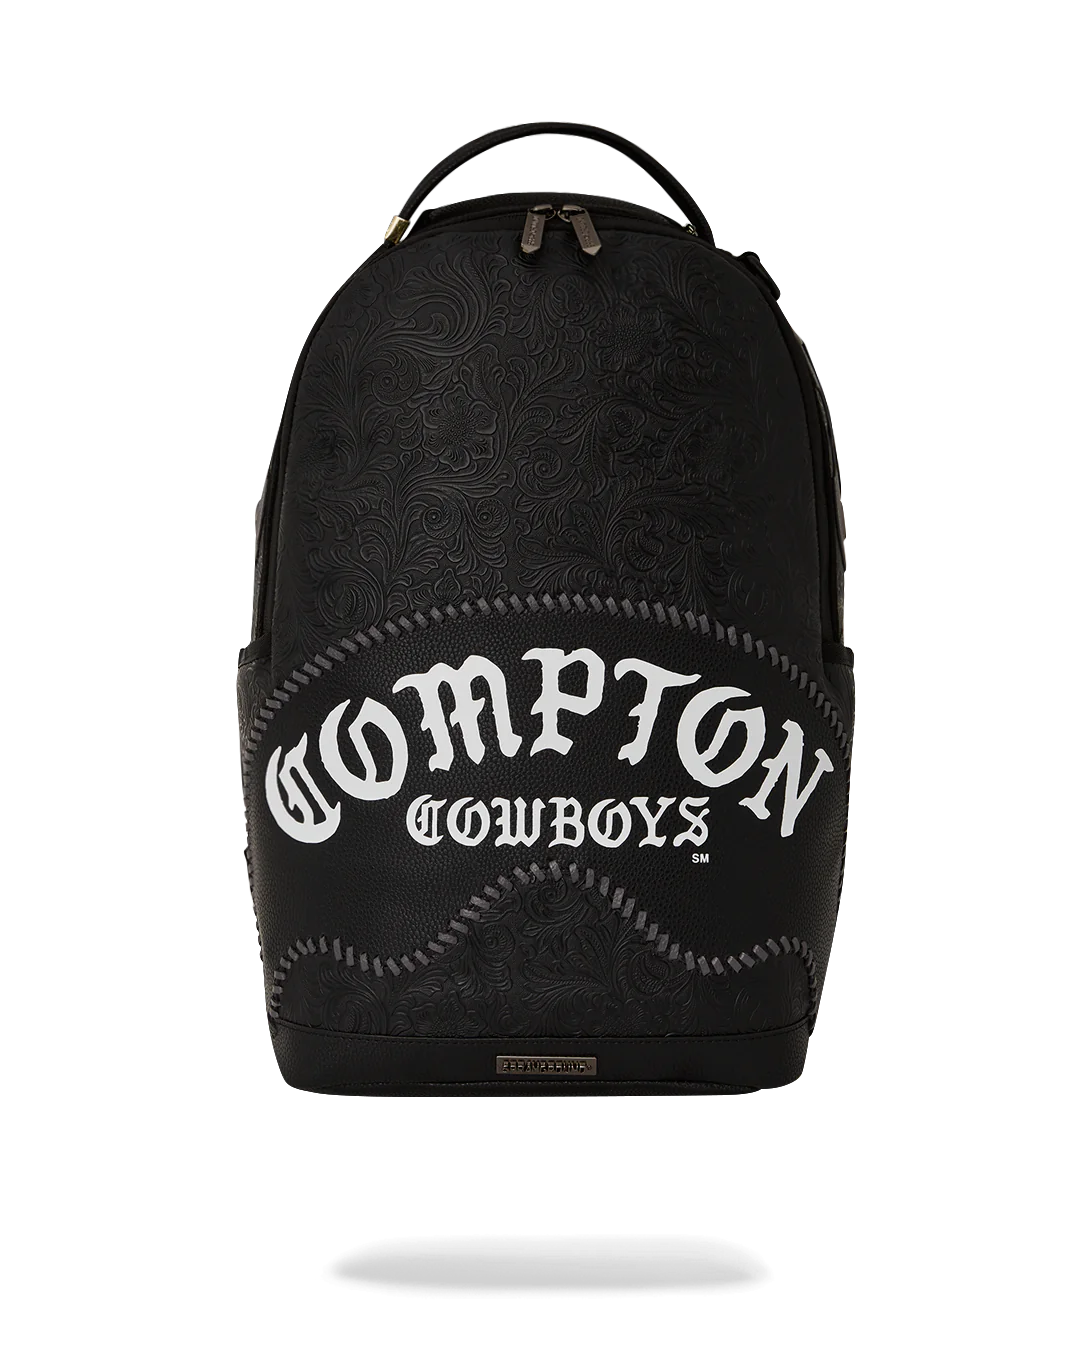 Sprayground - Compton Cowboys Welcome To My City Backpack